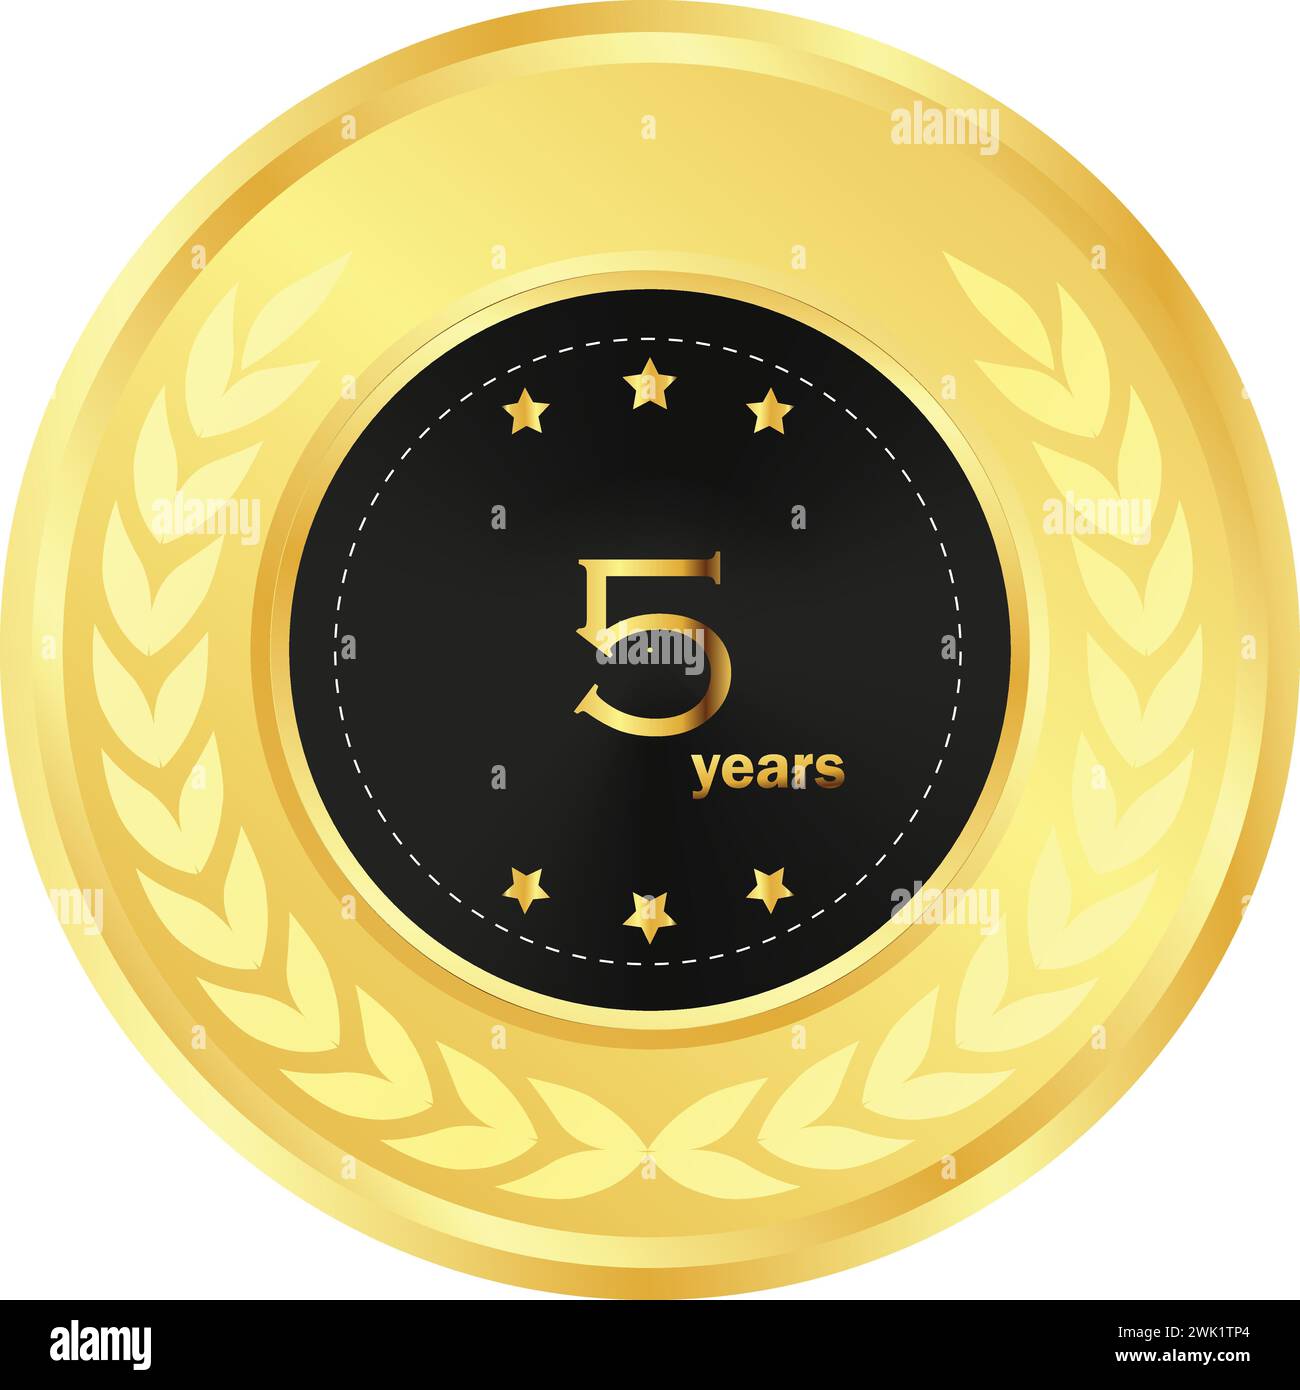 5th anniversary in gold and Black, anniversary gift, five Year Anniversary Celebrating, Golden seal, golden ring, birthday celebration Stock Vector